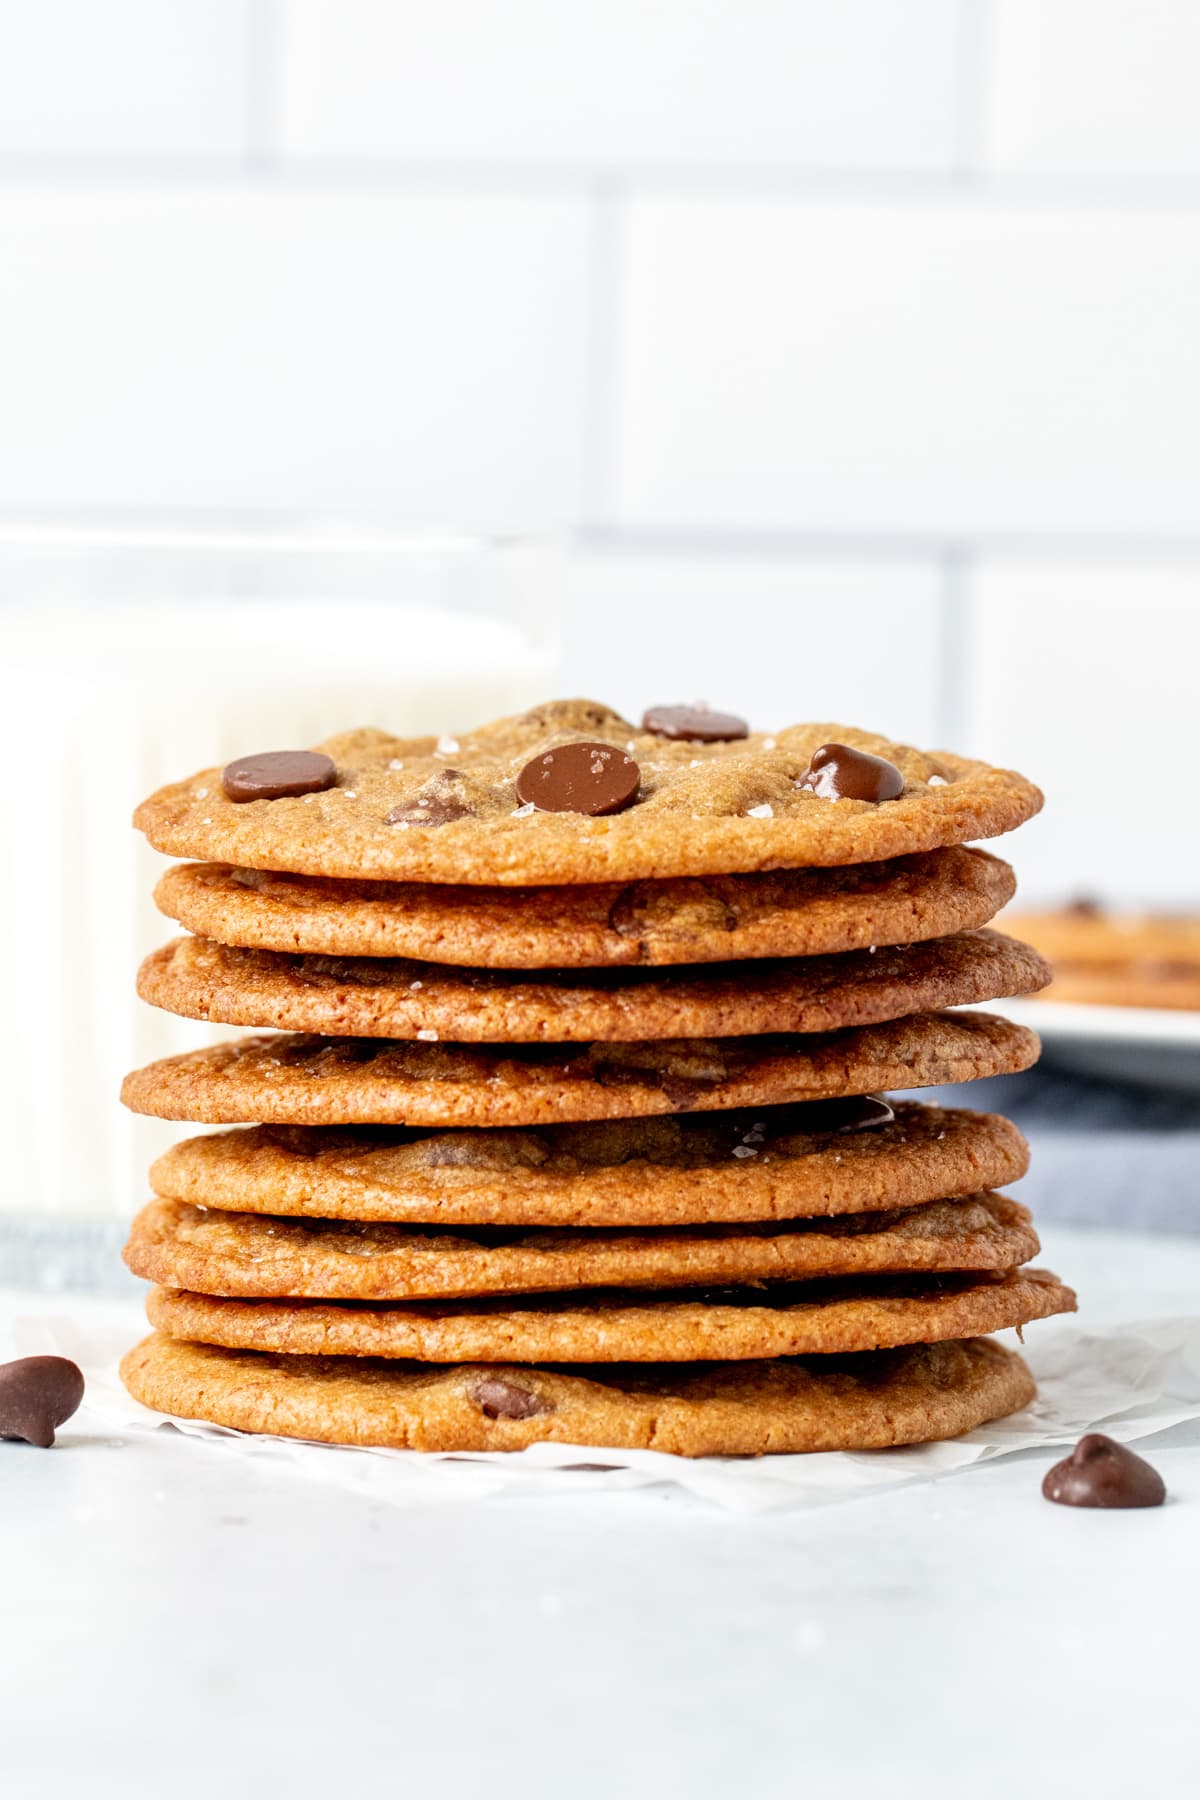 Thin chocolate chip cookies, stacked on top of each other